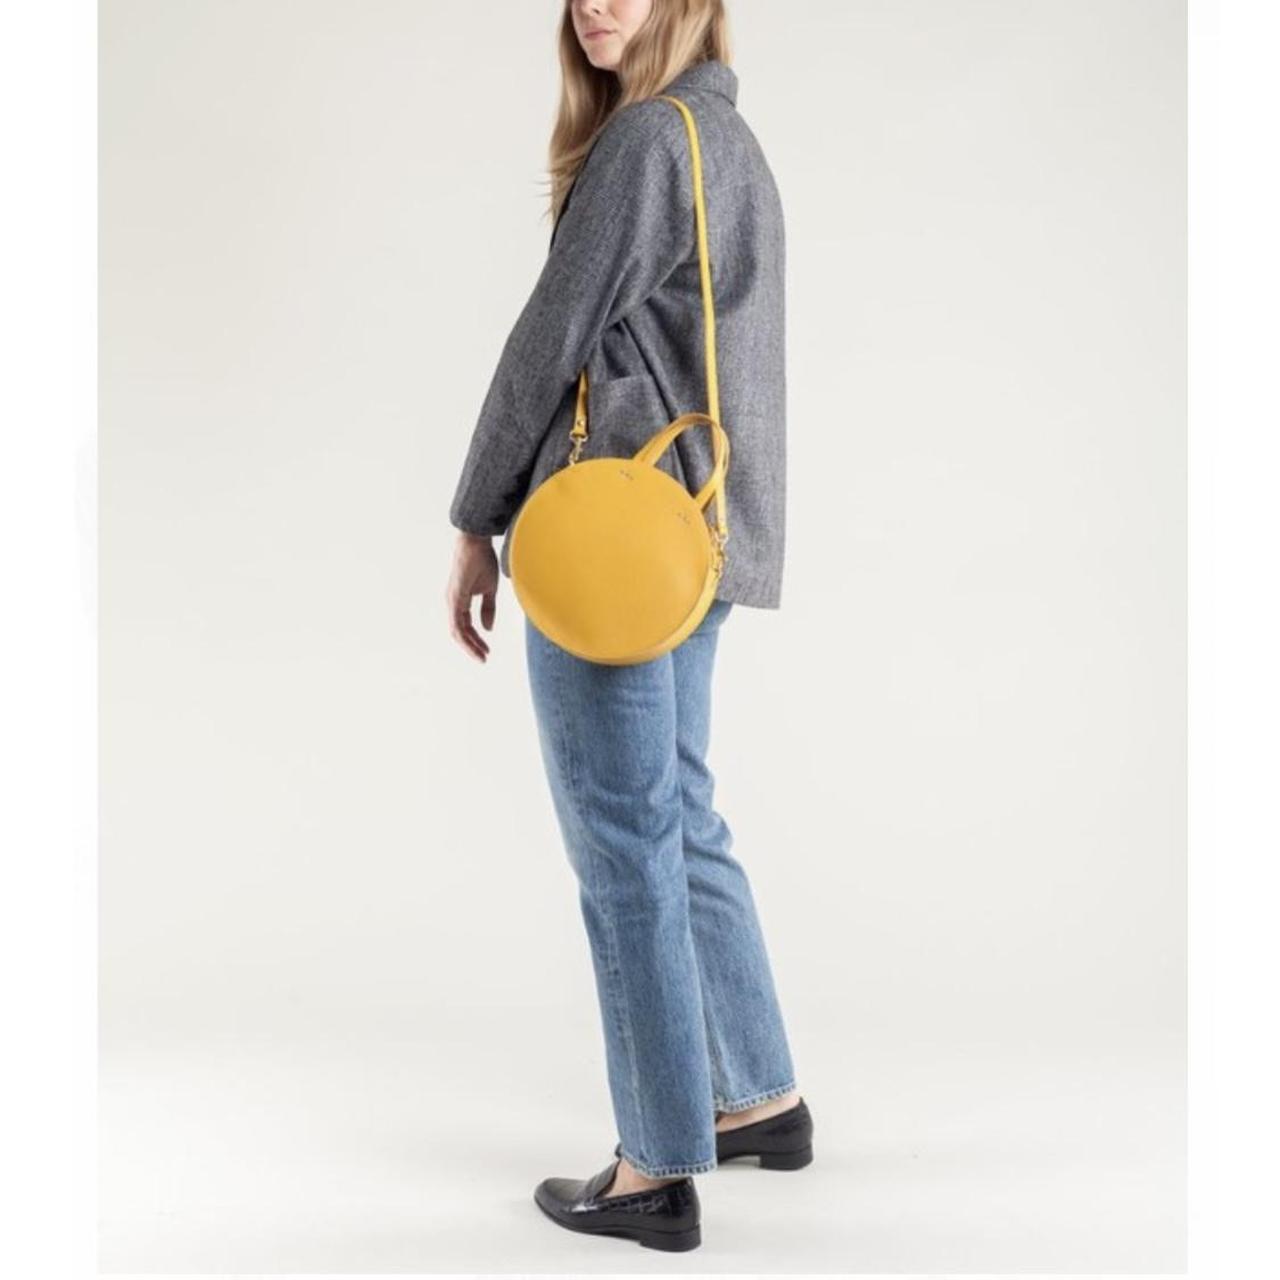 Yellow Petit Alistair Bag by Clare V. for $55